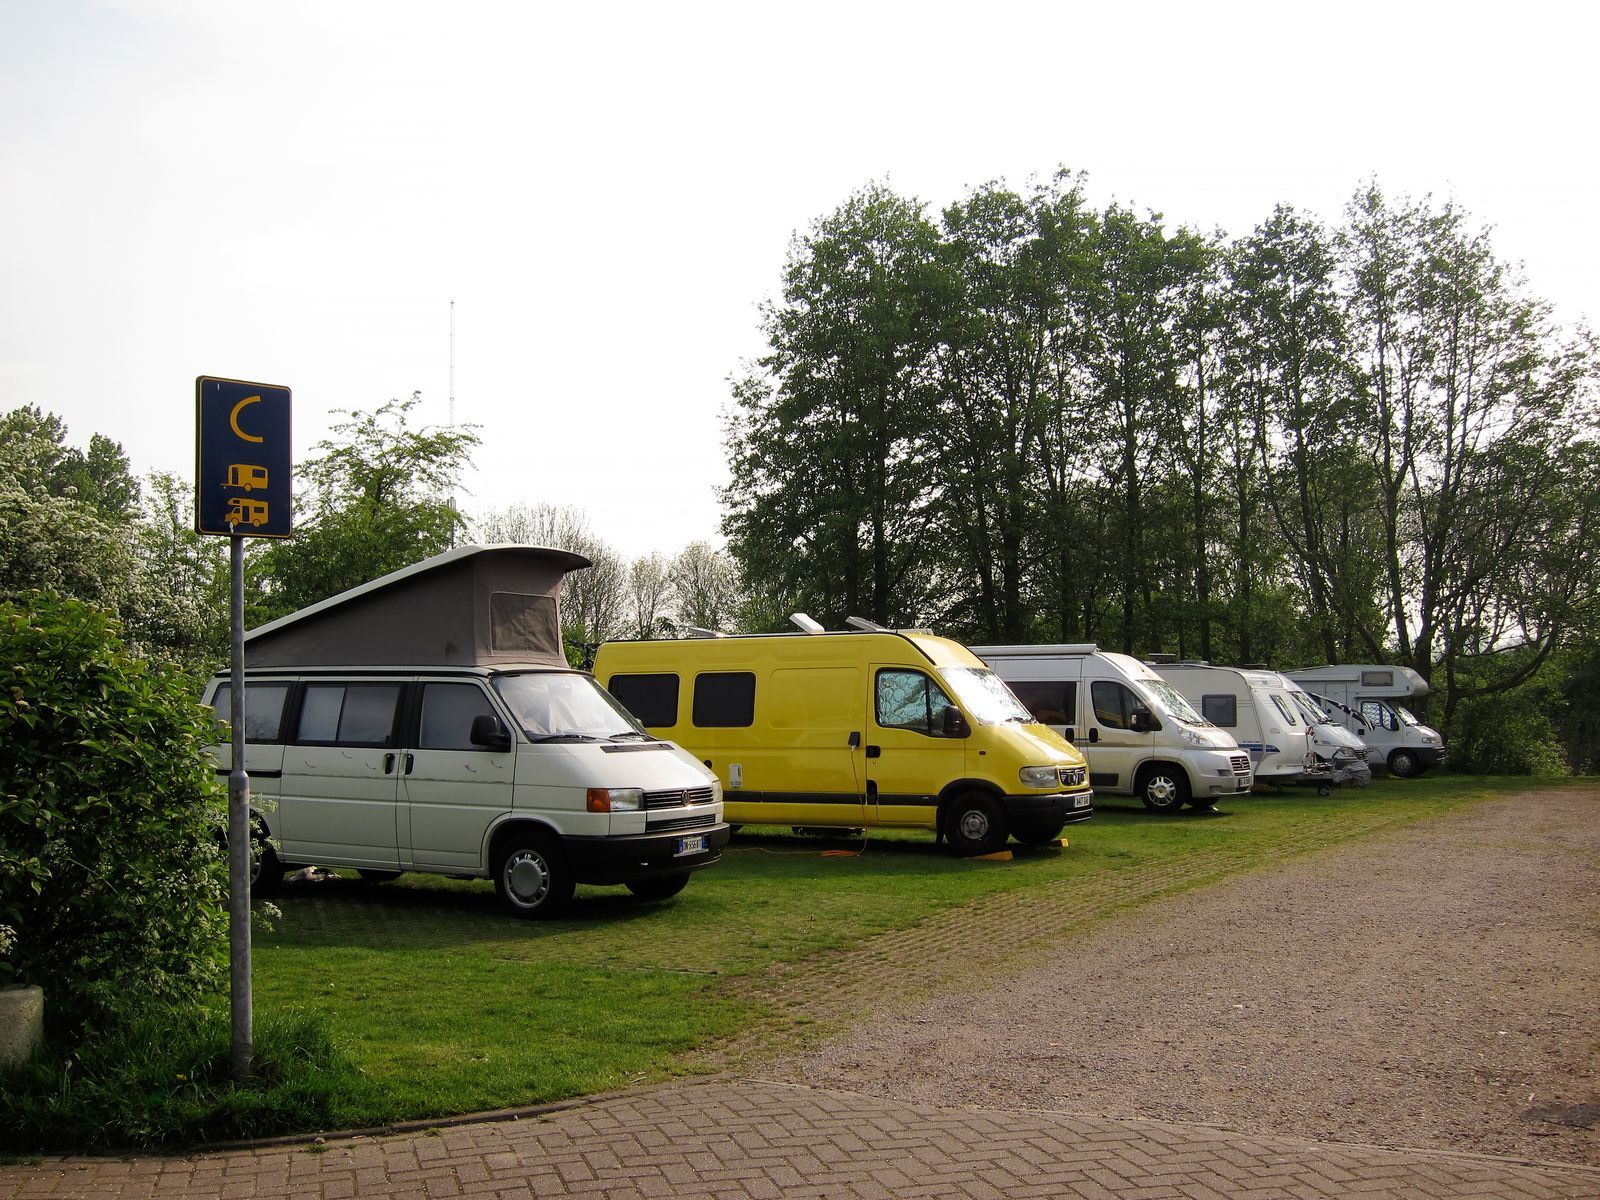 Two motorhome/caravan pitches side by side